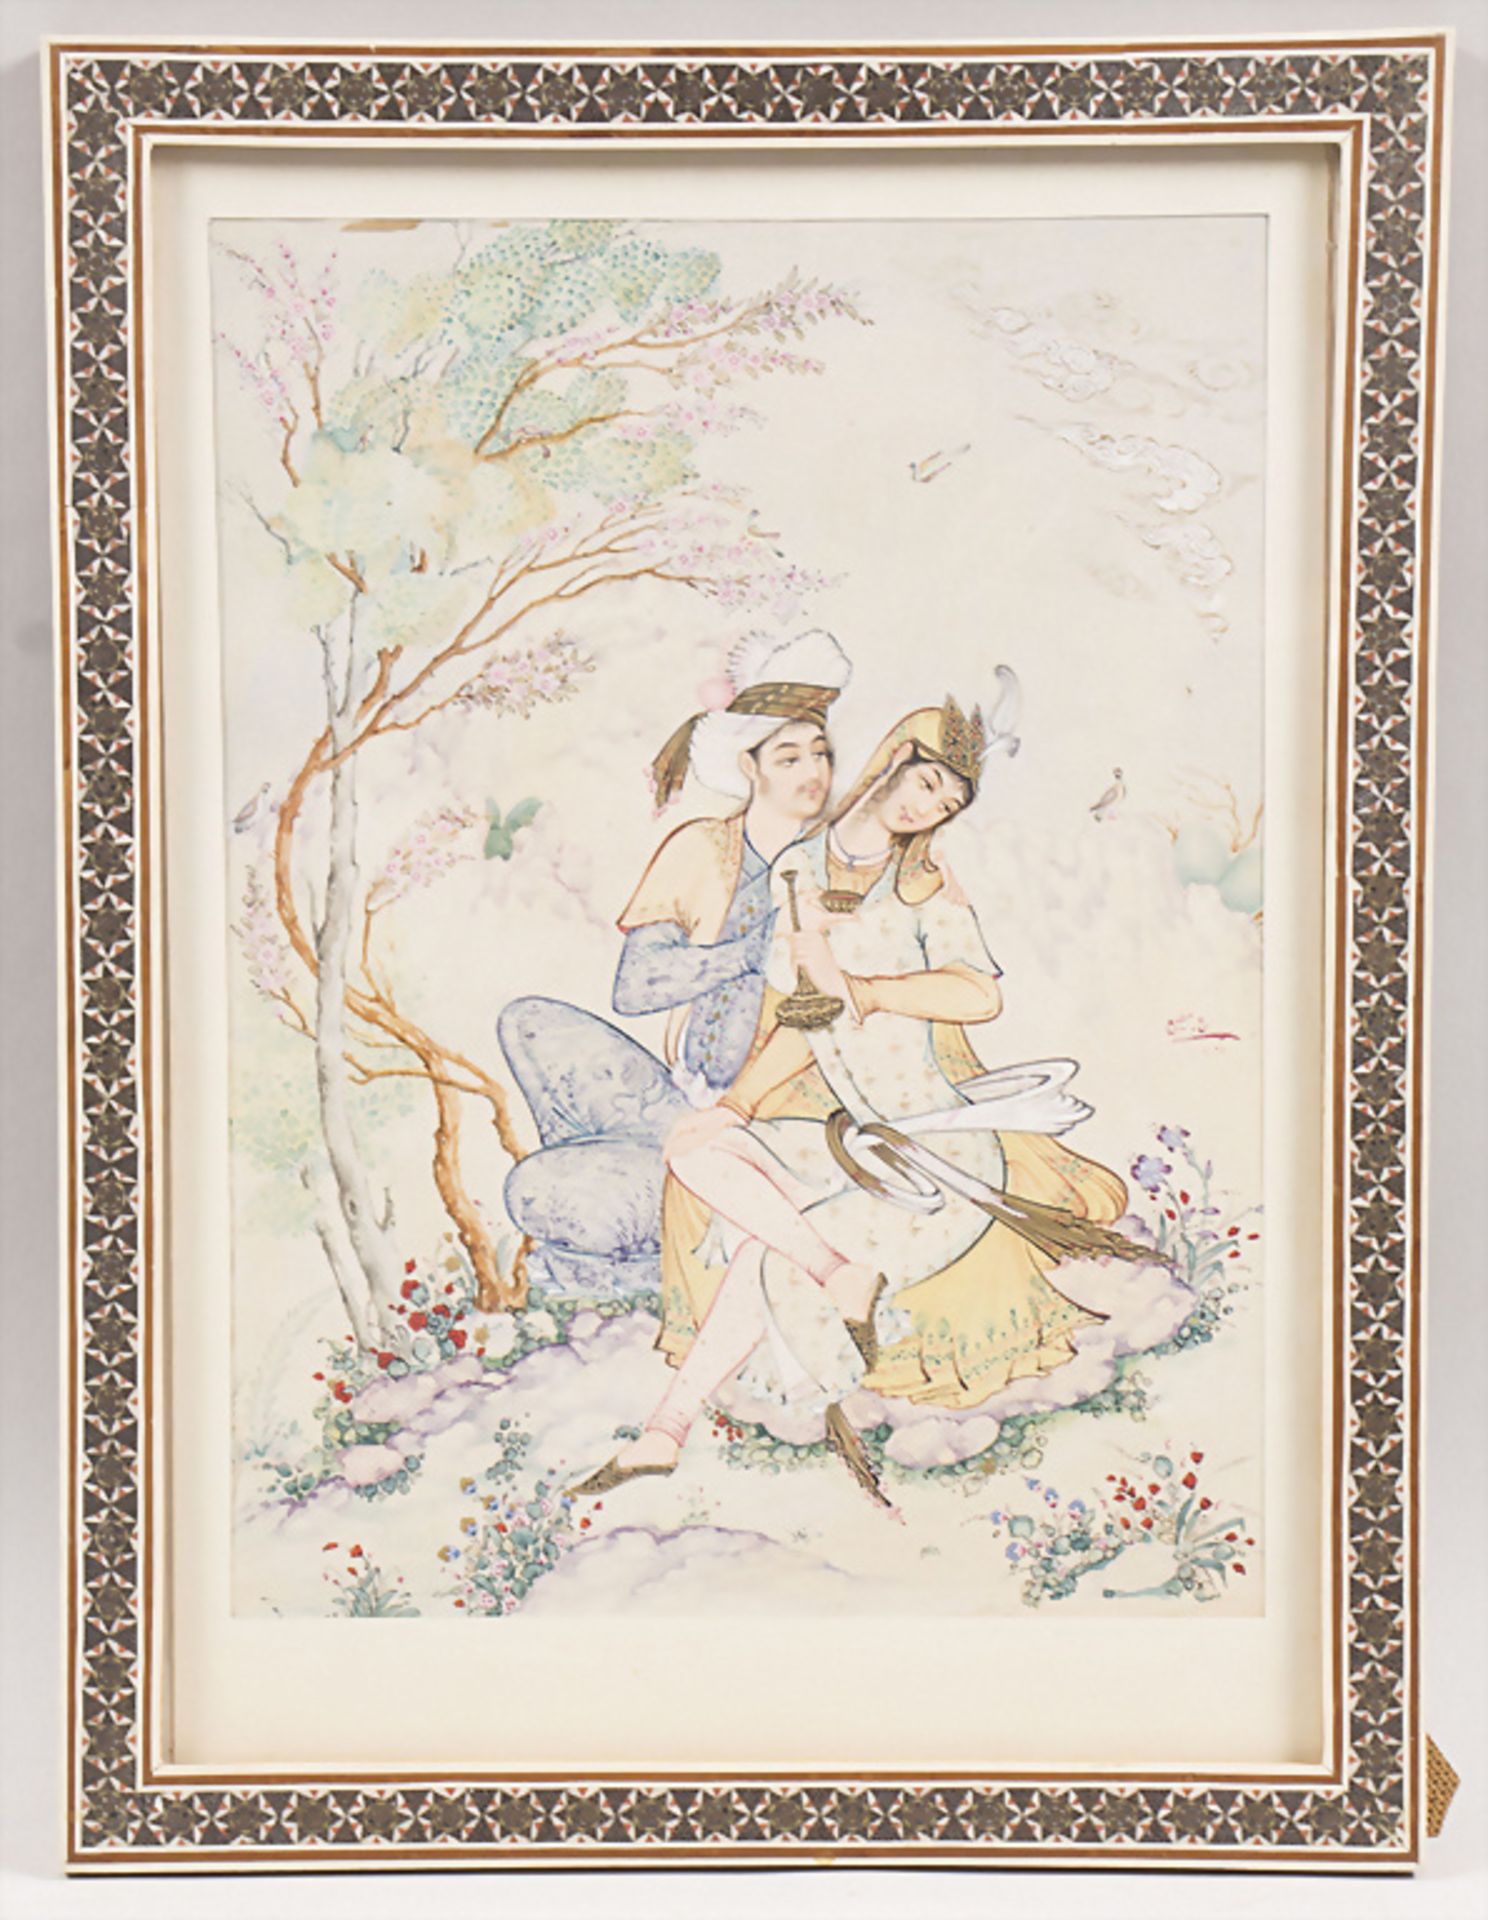 Aquarellmalerei 'Orientalisches Liebespaar' / A watercolor painting 'Oriental lovers', wohl Persien - Image 2 of 3